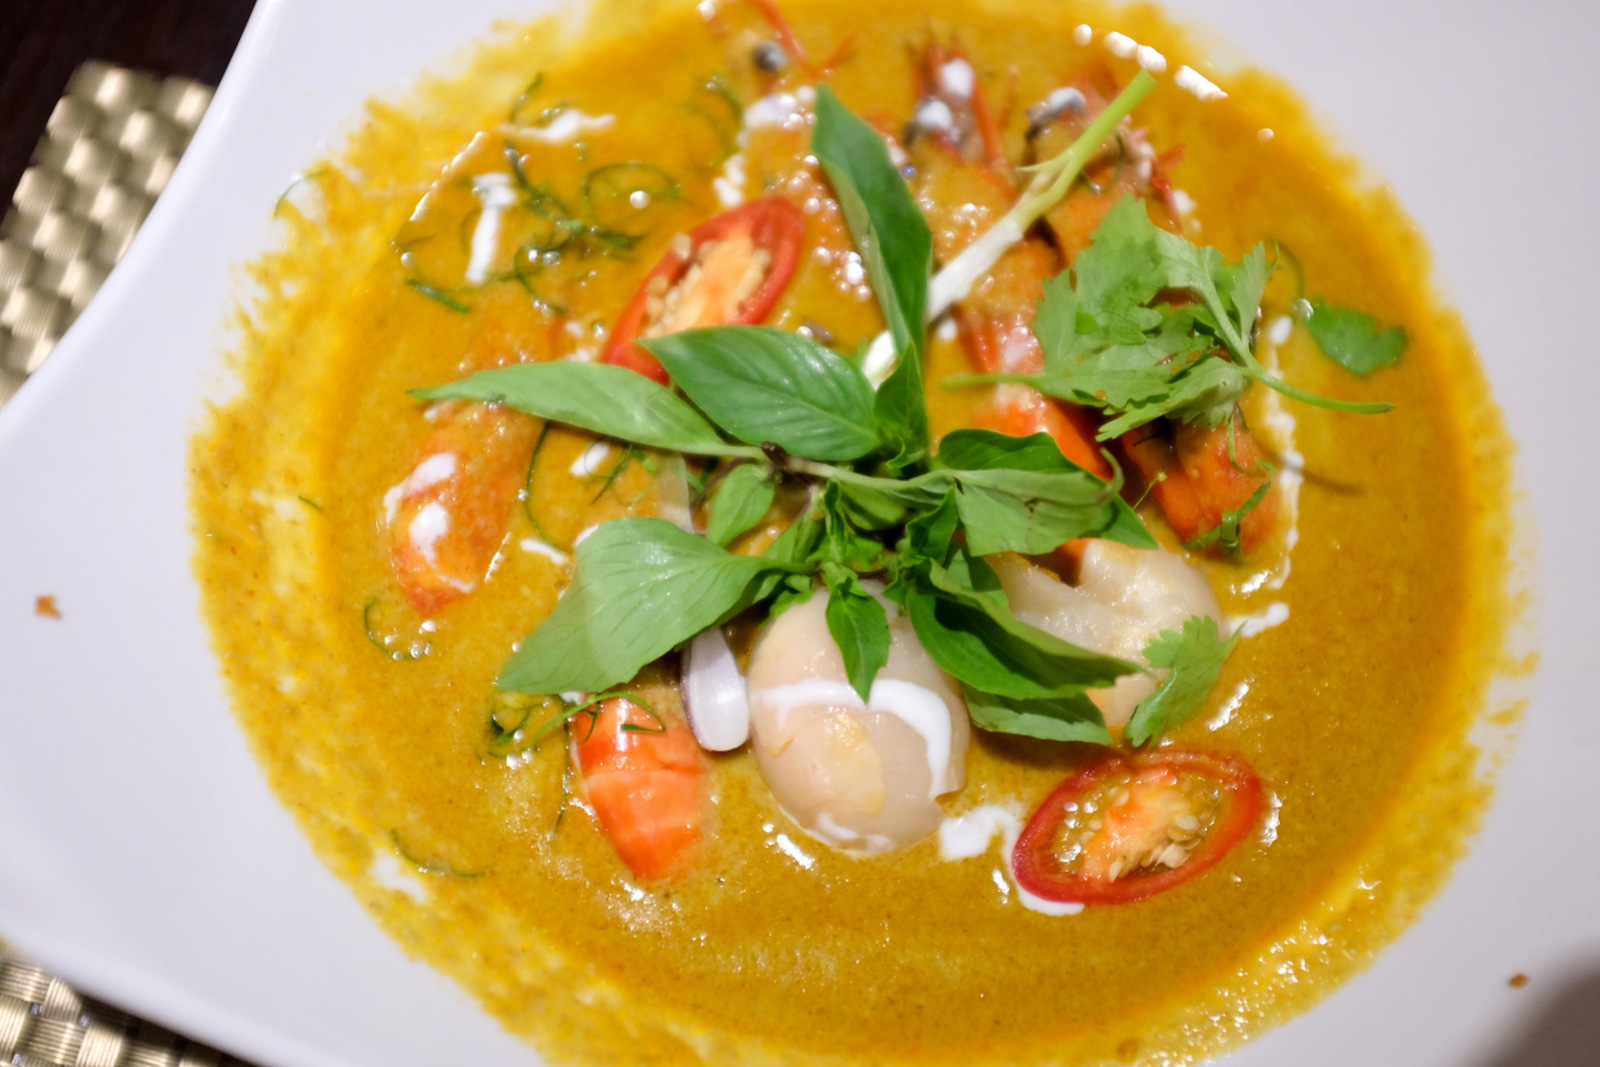 2. Chang Thai - Yellow curry with prawns